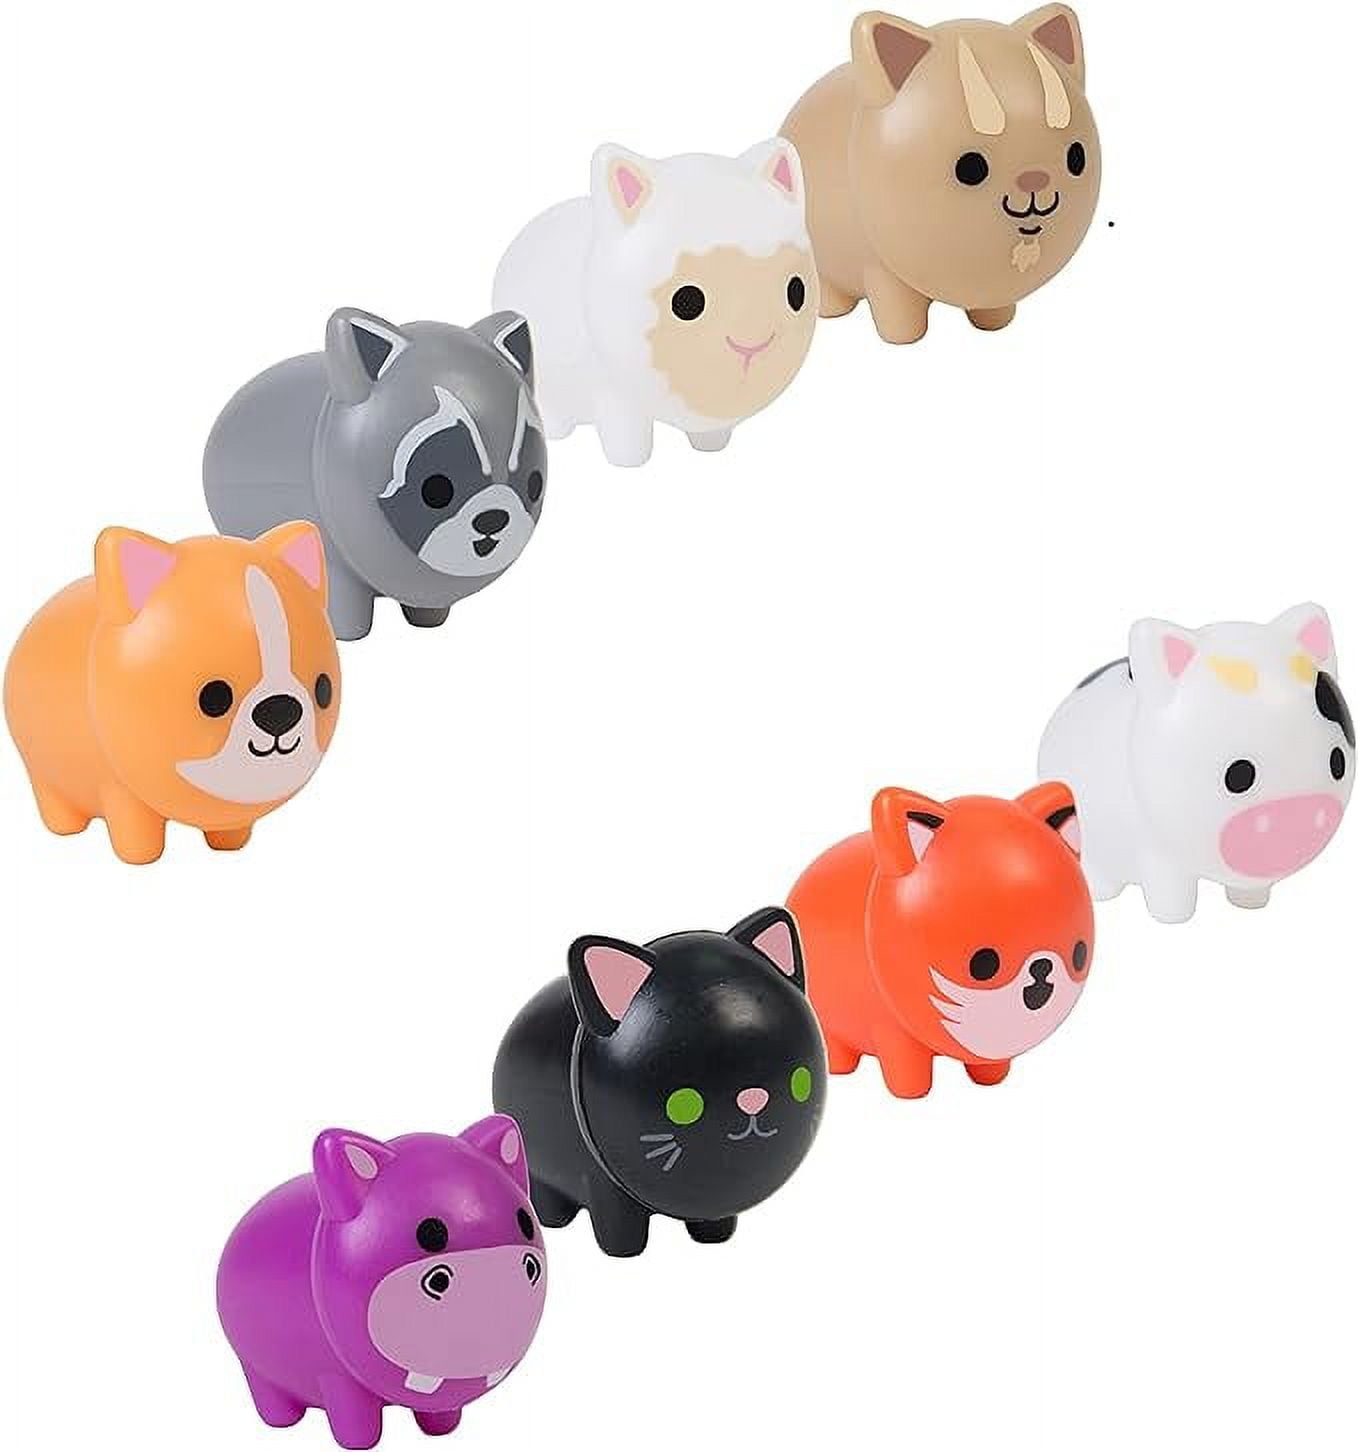 24 Cute Soft Flocked Tiny Dog Animal Figurines - Mini Dino Toys - Small Novelty Prize Toy - Party Favors - Gift- Easter Egg Filler - Small Novelty